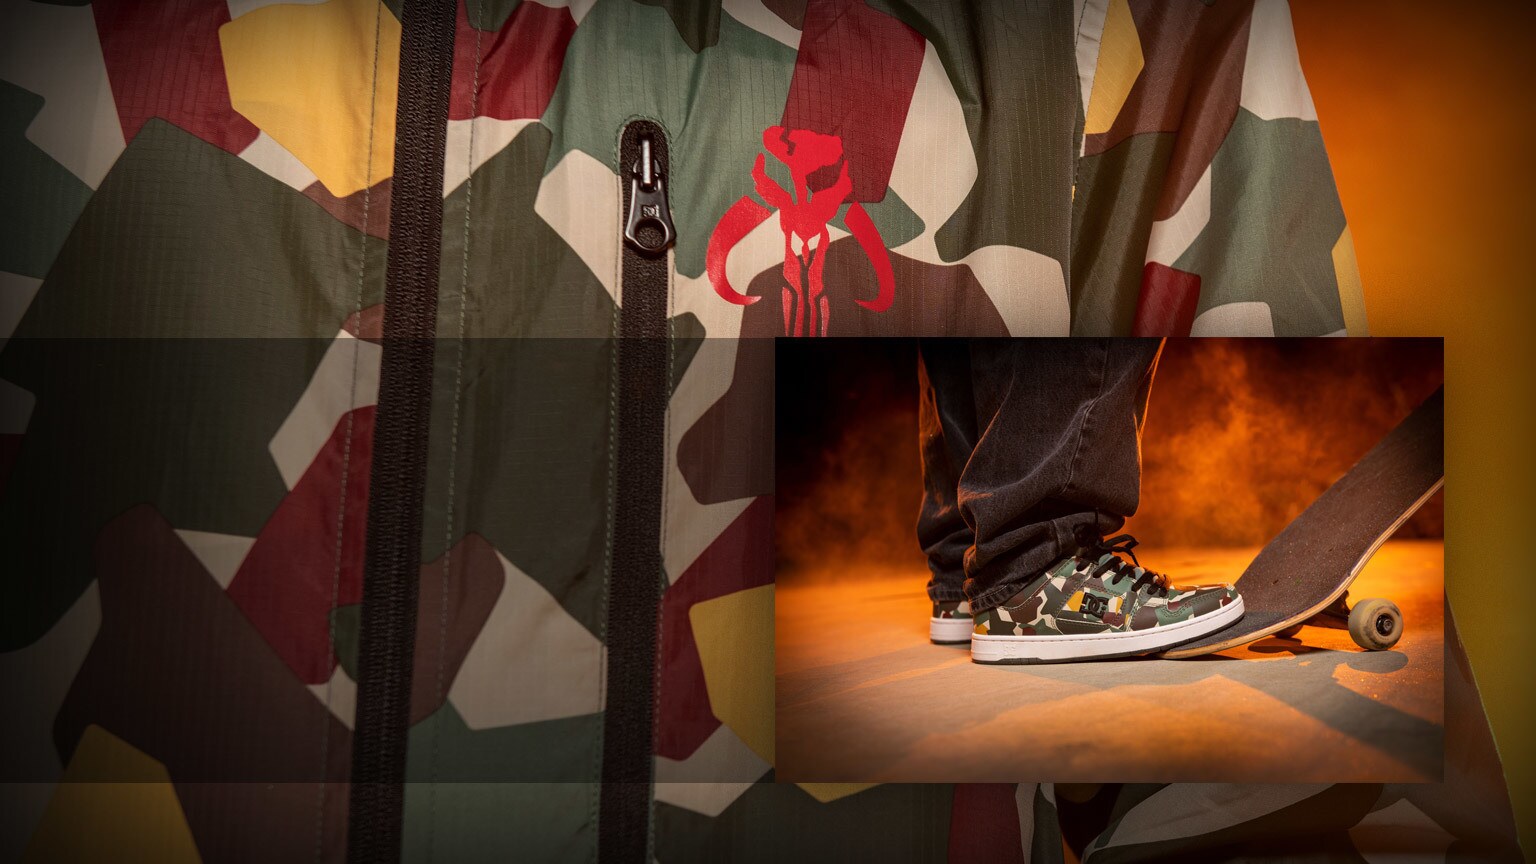 DC Shoes Collects the Bounty on a New Boba Fett Capsule Collection - Reveal